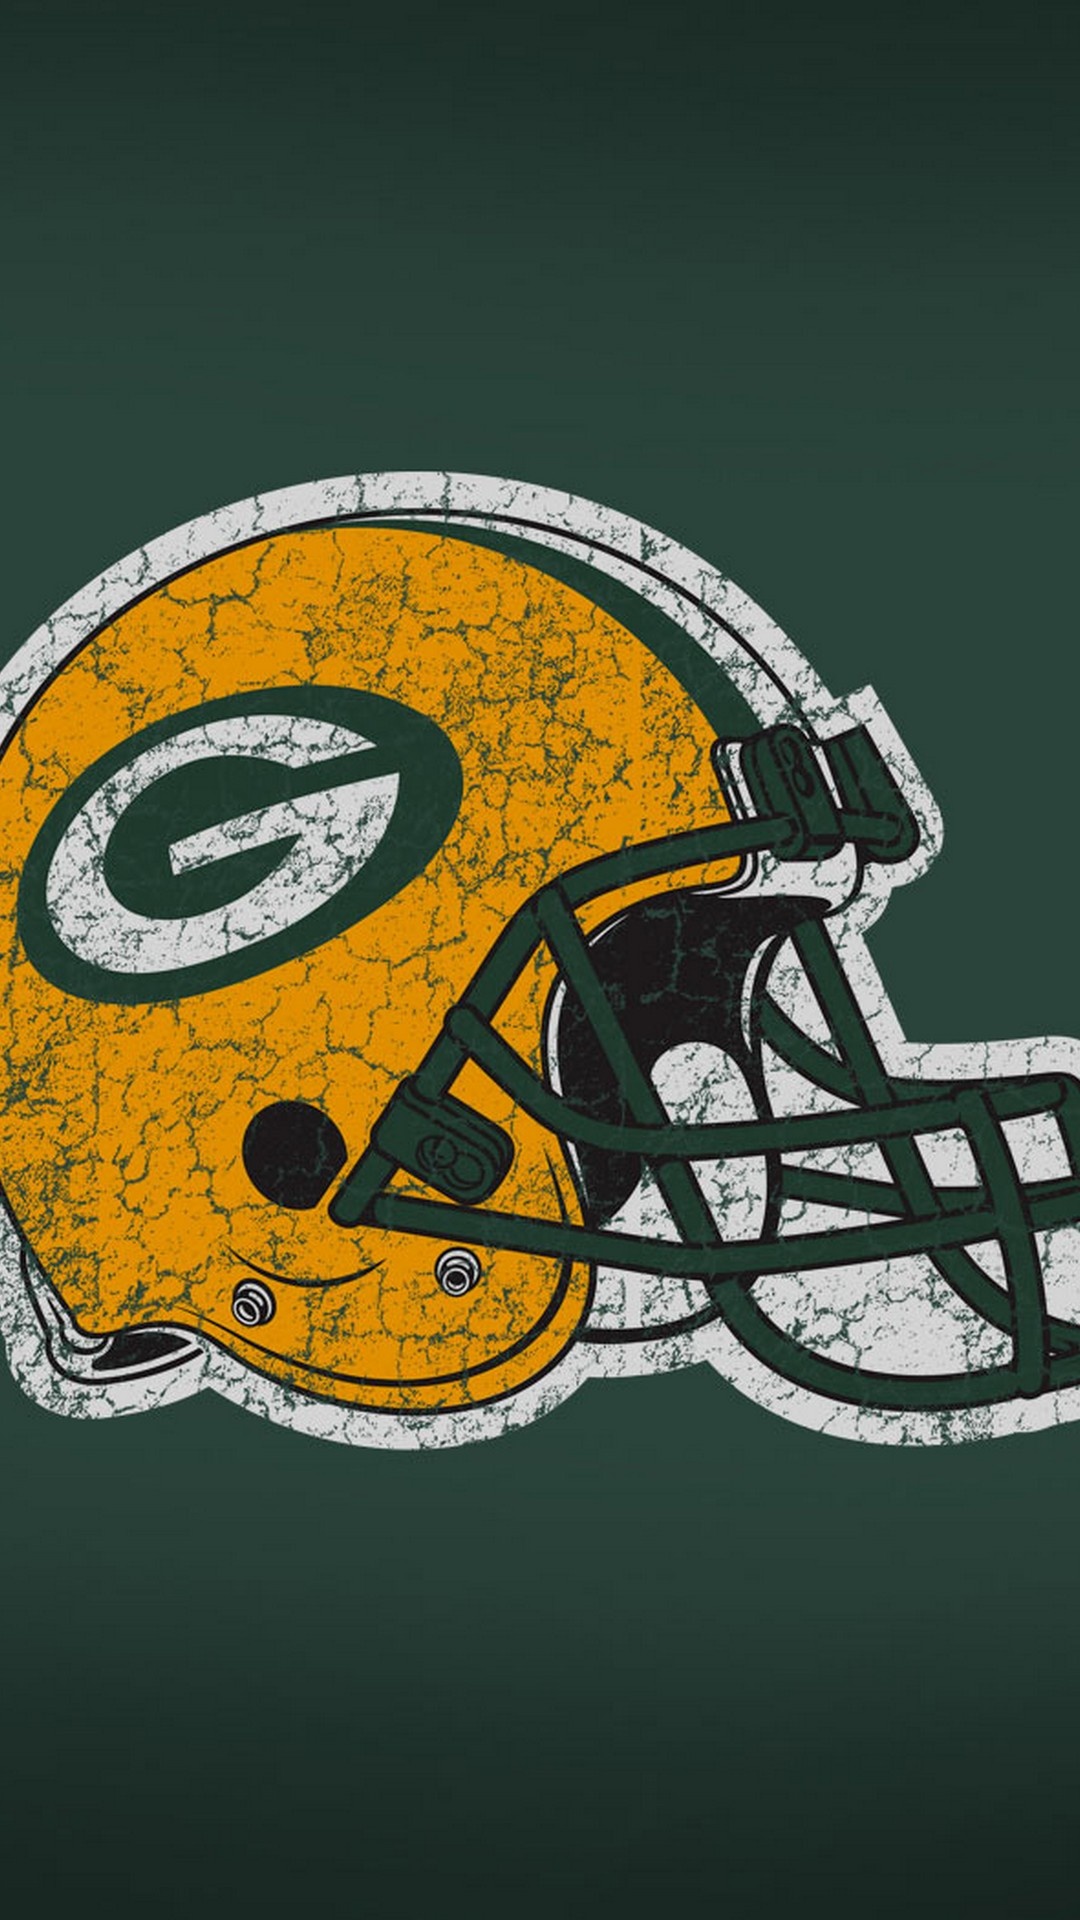 Green Bay Packers: The National Football League, A member club of the National Football Conference North division. 1080x1920 Full HD Wallpaper.